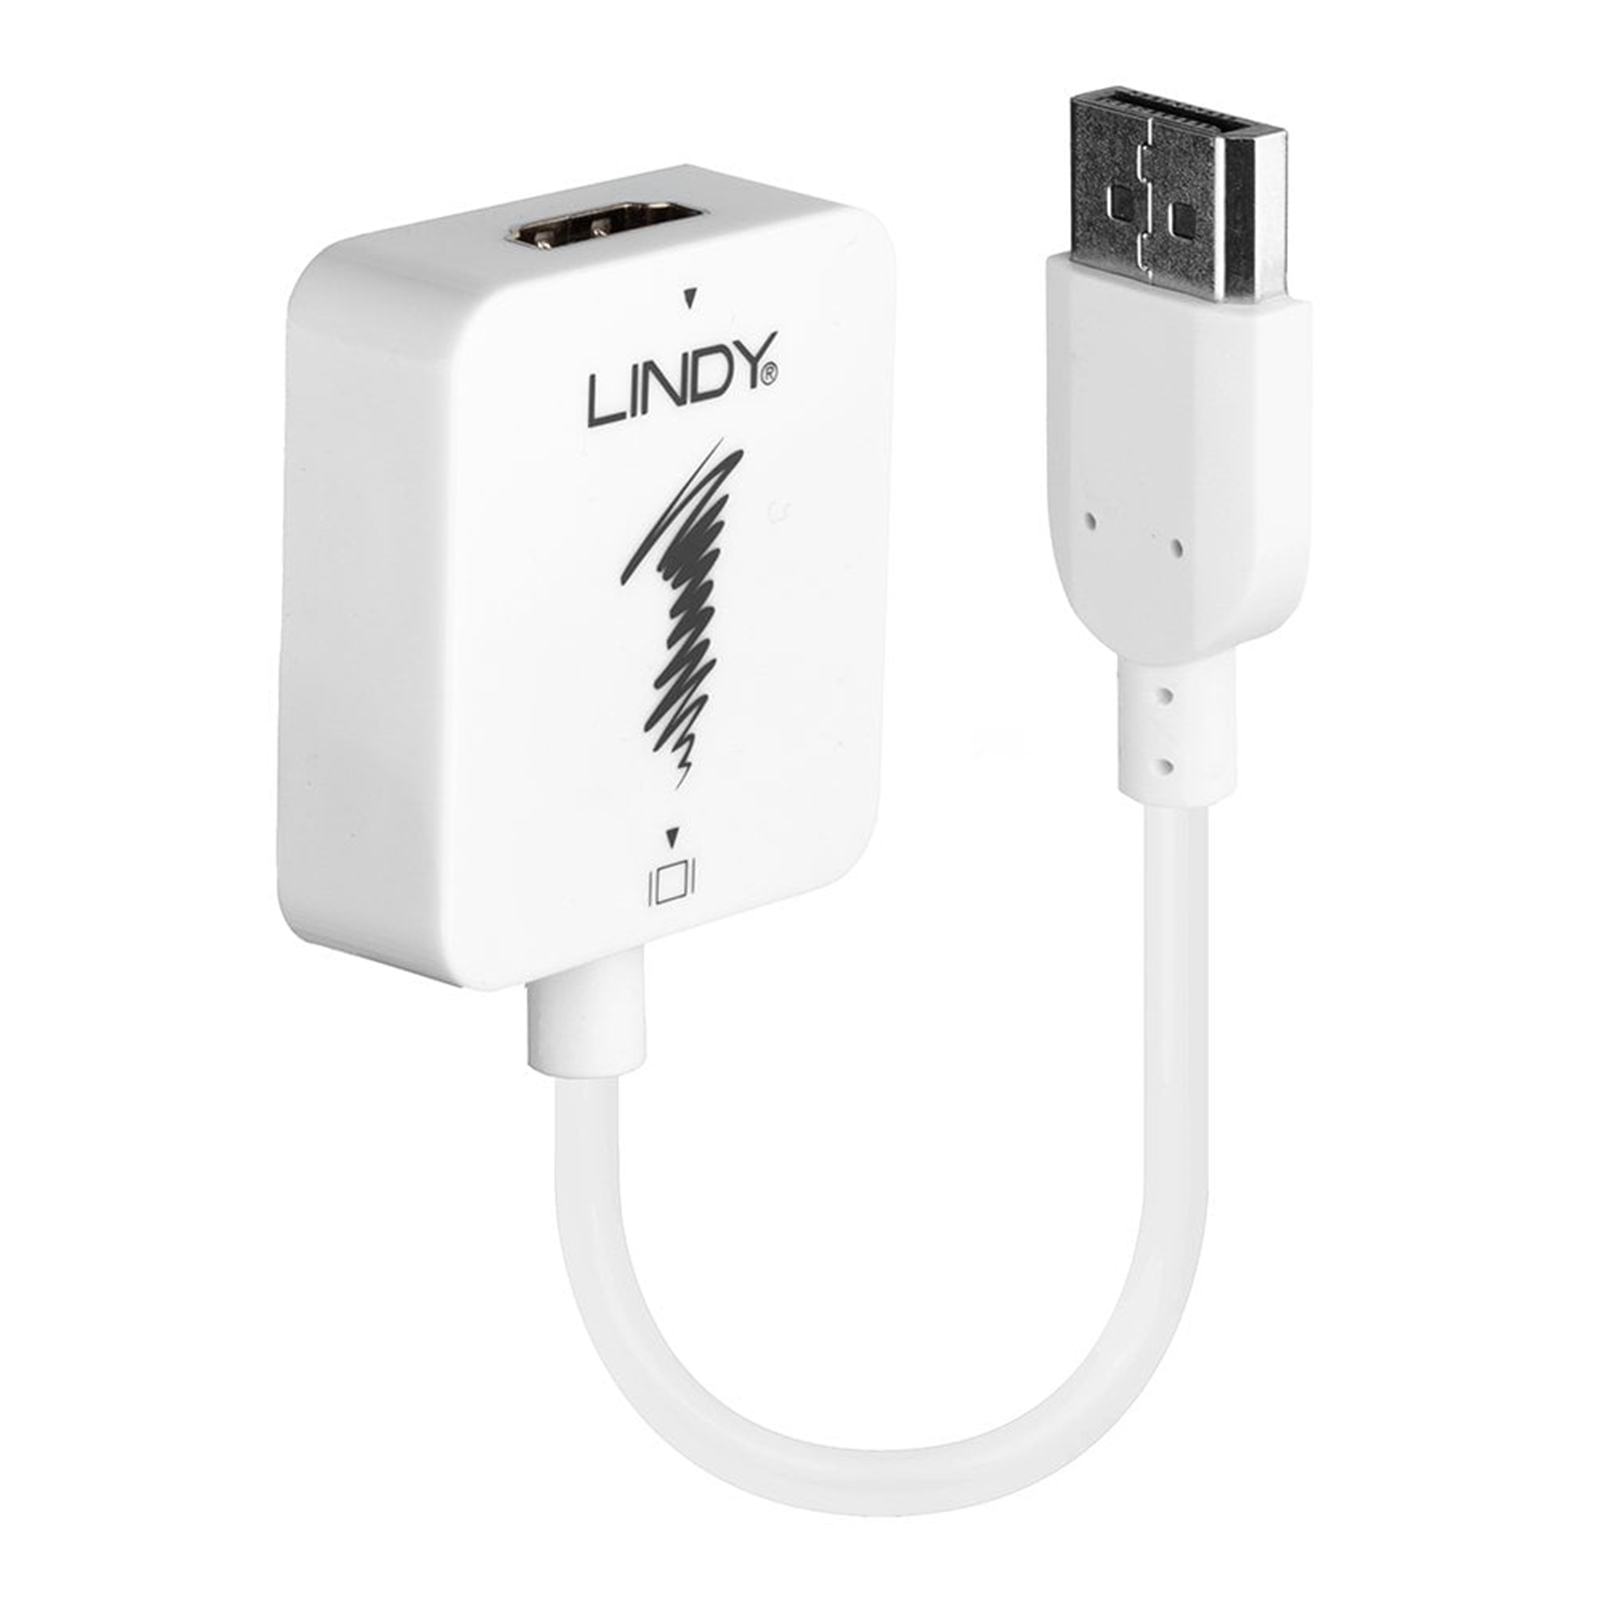 LINDY 38146 HDMI 1.4 to DisplayPort 1.1 Converter, Supports resolutions up to 3840x2160@30Hz, Quick and simple Plug & Play installation, 2 year warranty